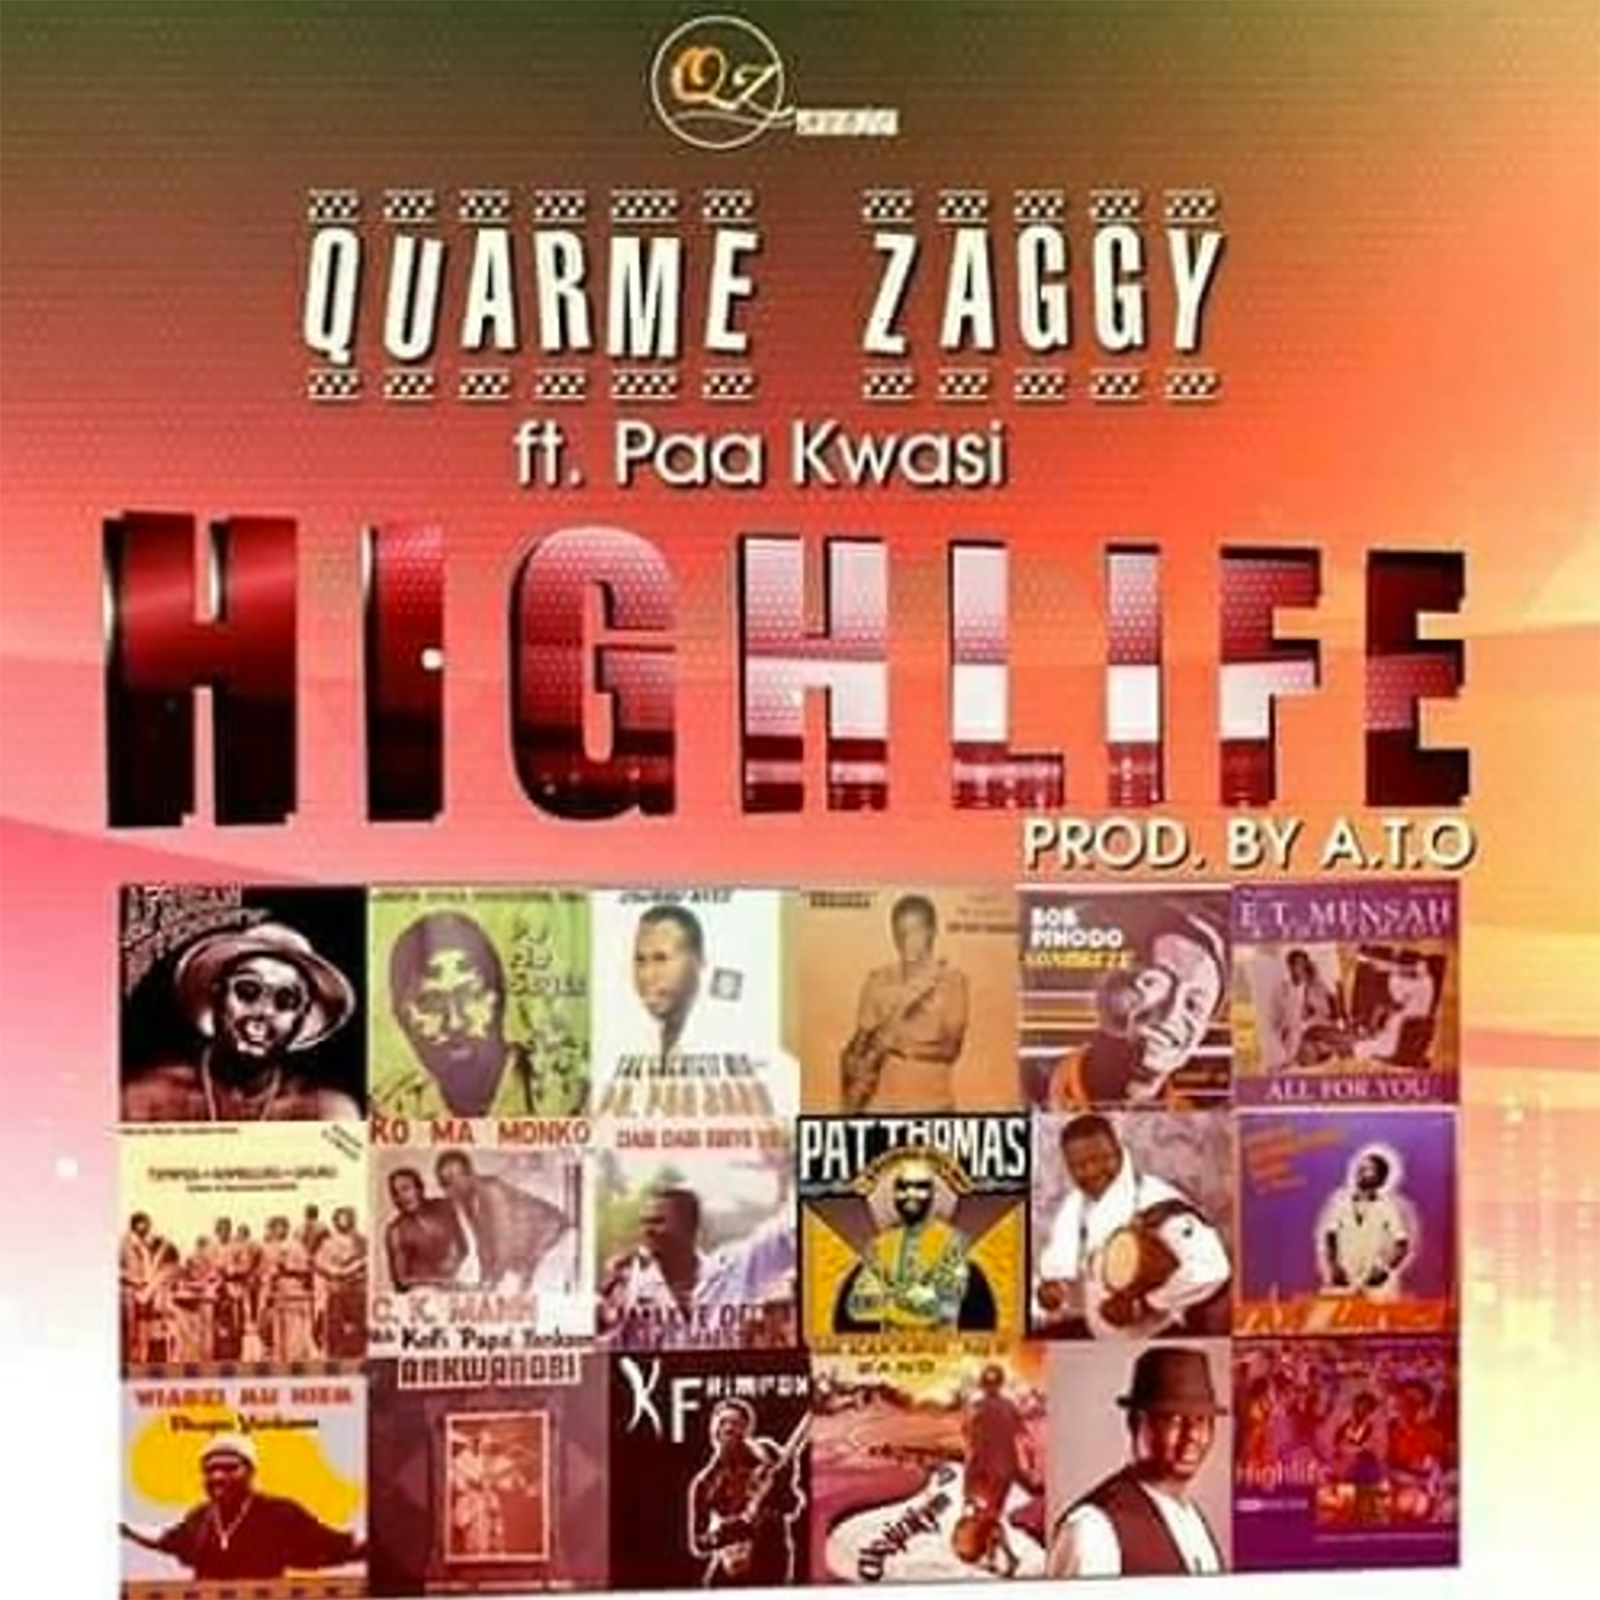 Highlife by Quarme Zaggy feat. Paa Kwasi